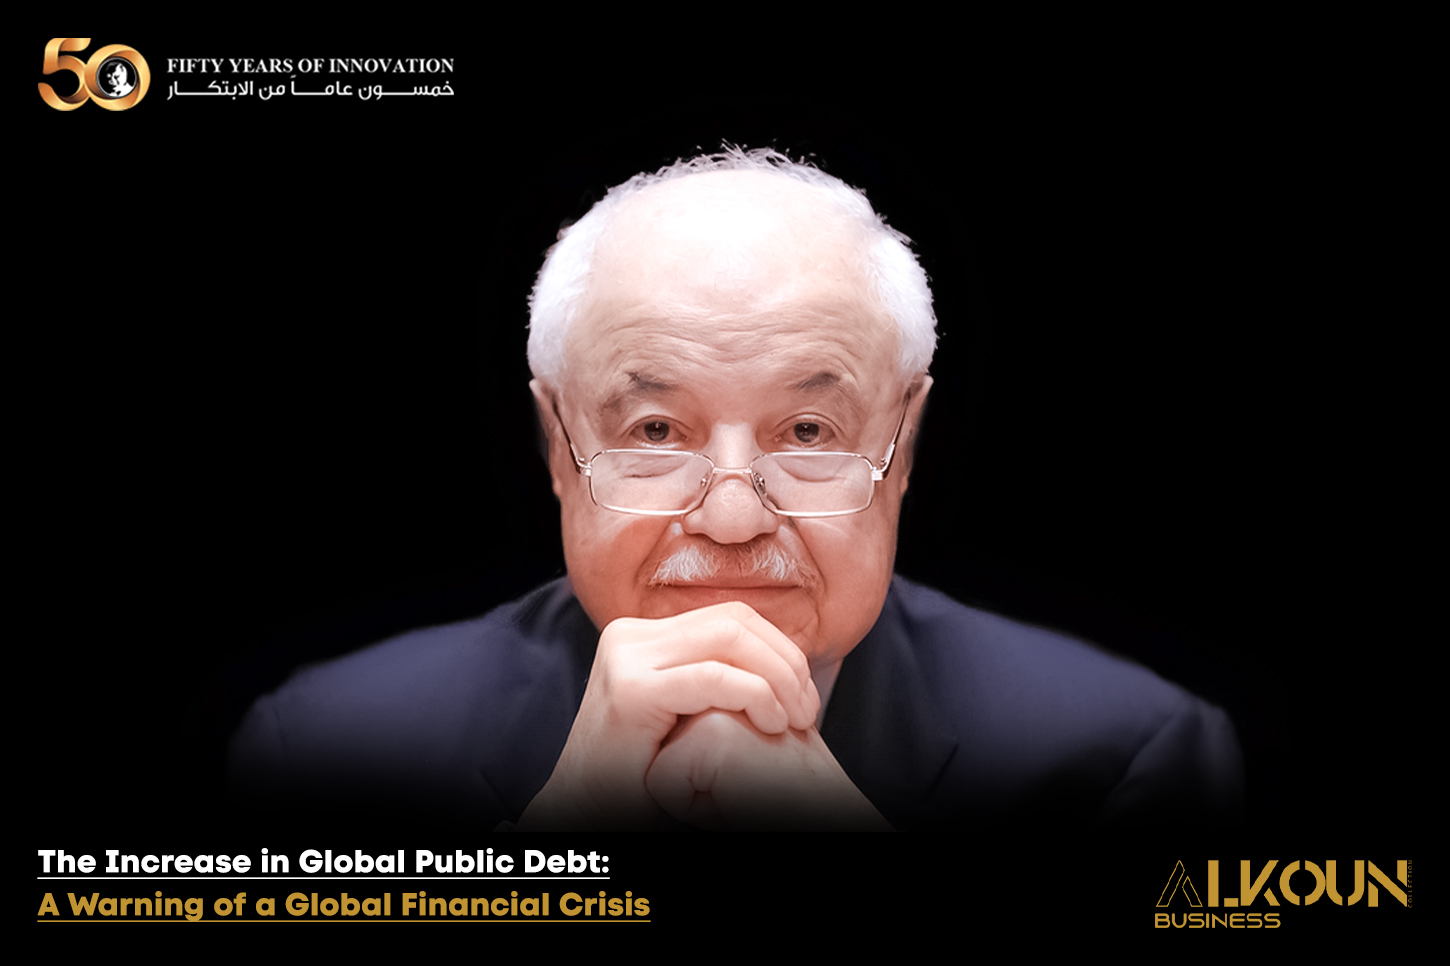 The Increase in Global Public Debt: A Warning of a Global Financial Crisis